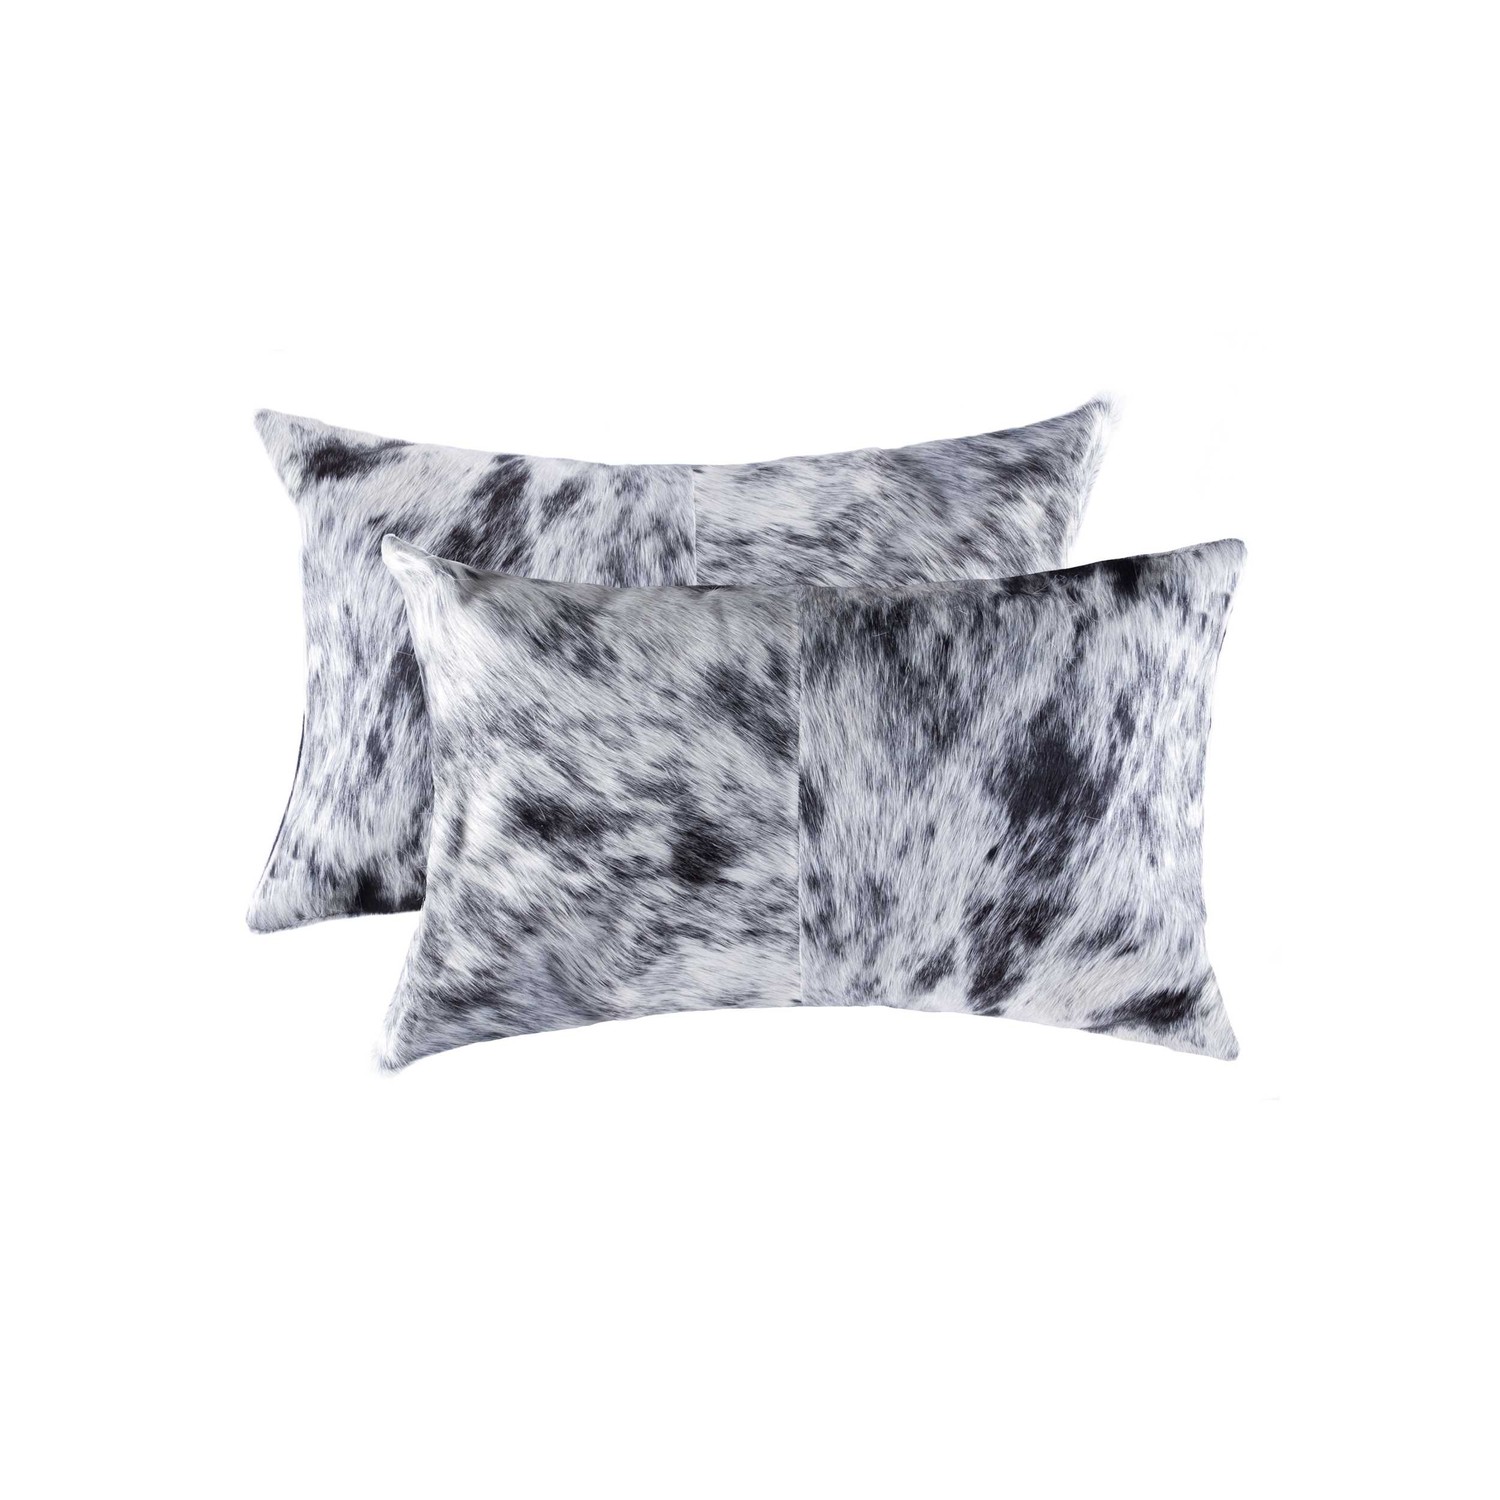 12" x 20" x 5" Salt And Pepper, Black And White, Cowhide - Pillow 2-Pack